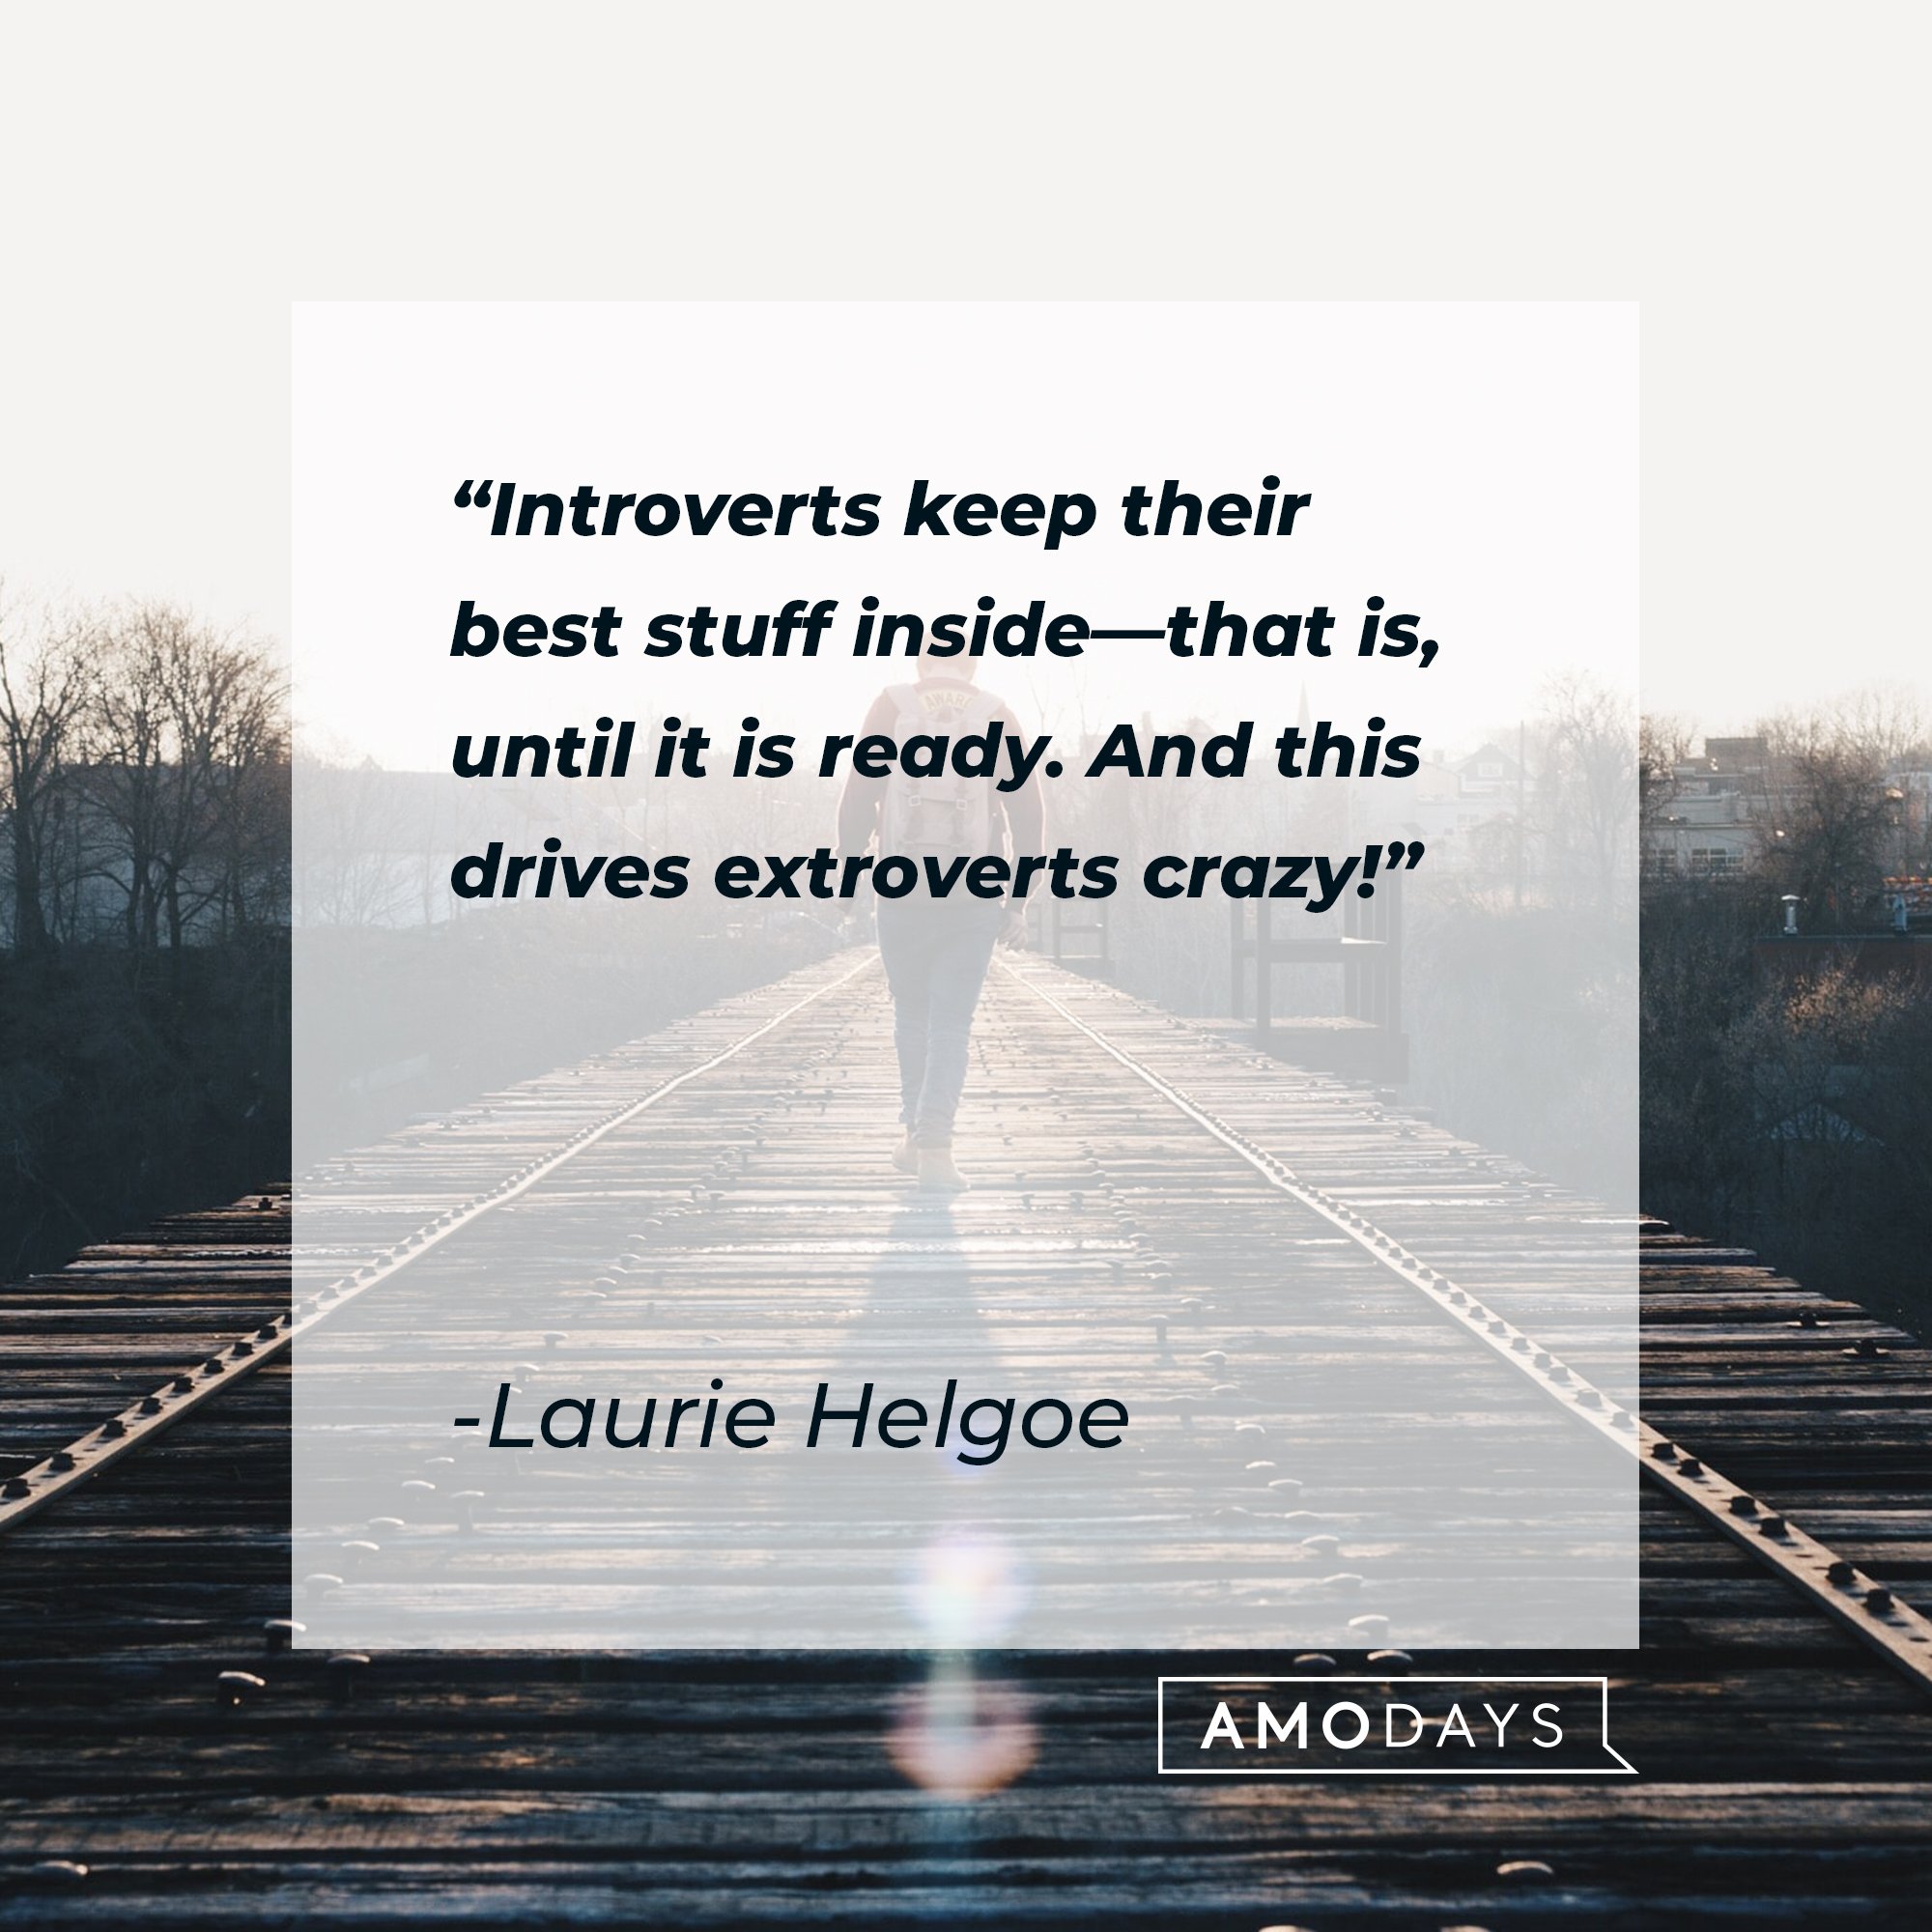  Laurie Helgoe’s quote: "Introverts keep their best stuff inside—that is, until it is ready. And this drives extroverts crazy!" | Image: AmoDays